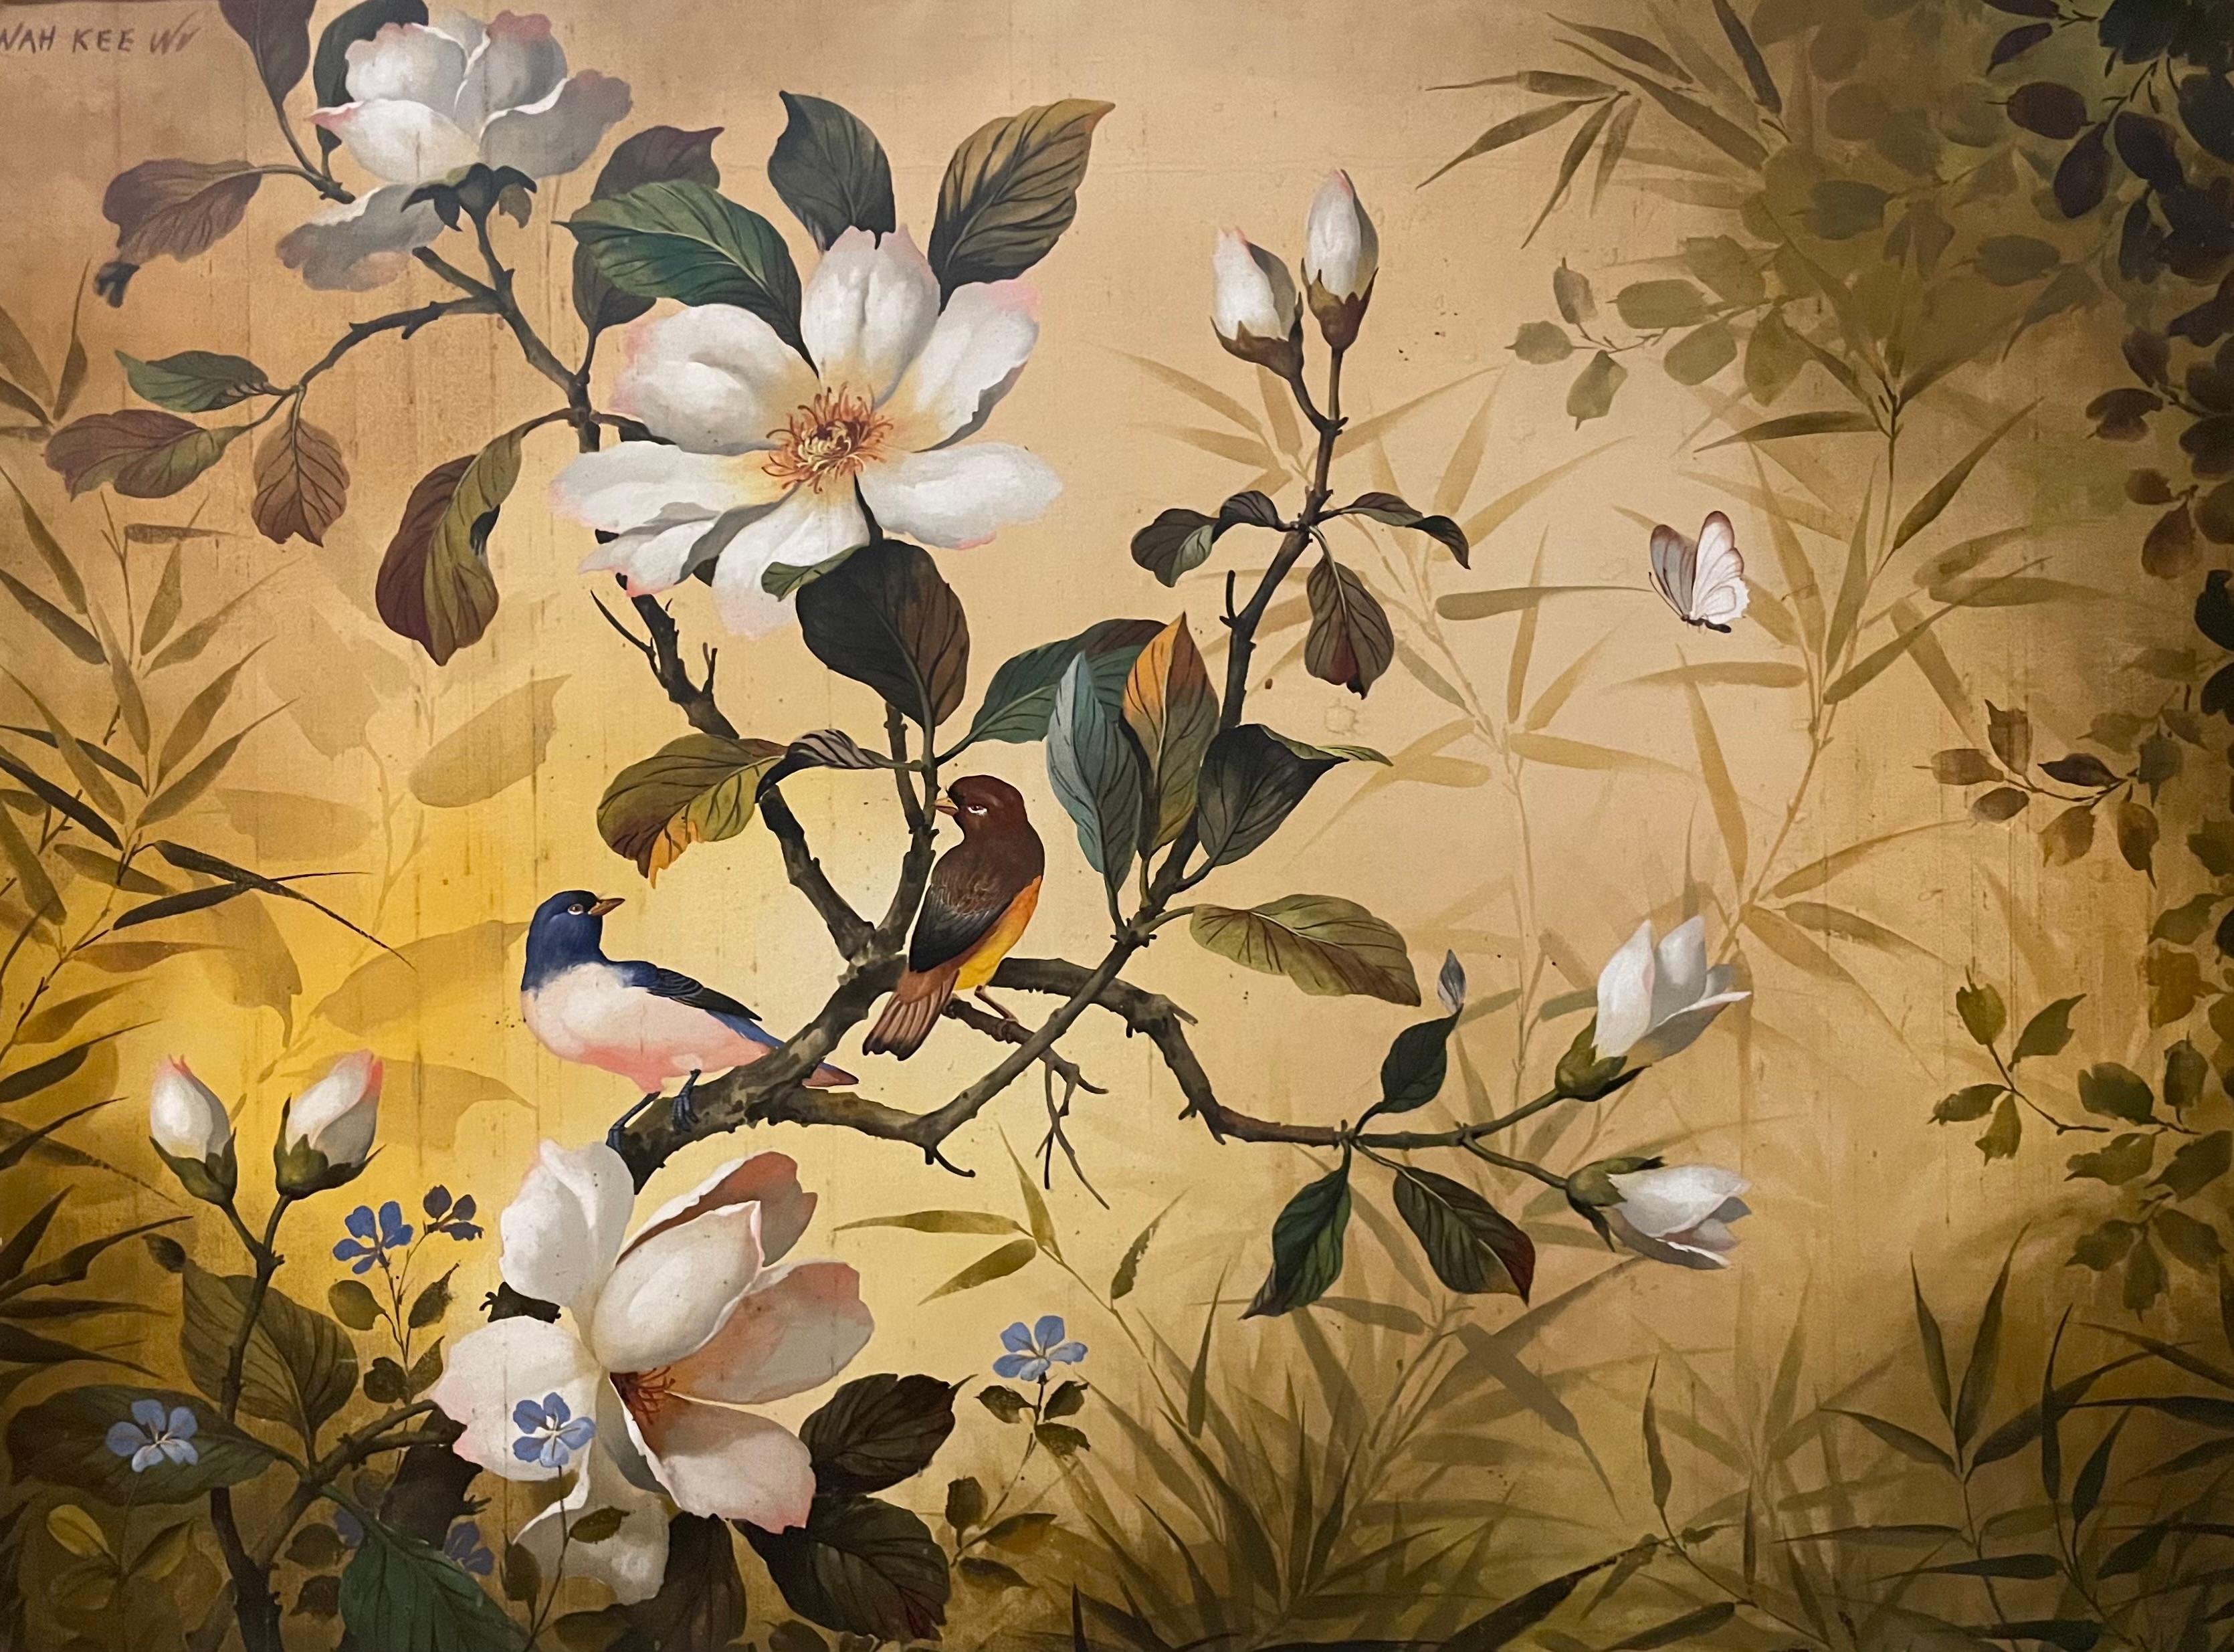 Kee Wu Wah Landscape Painting - Songbirds among Blossoms